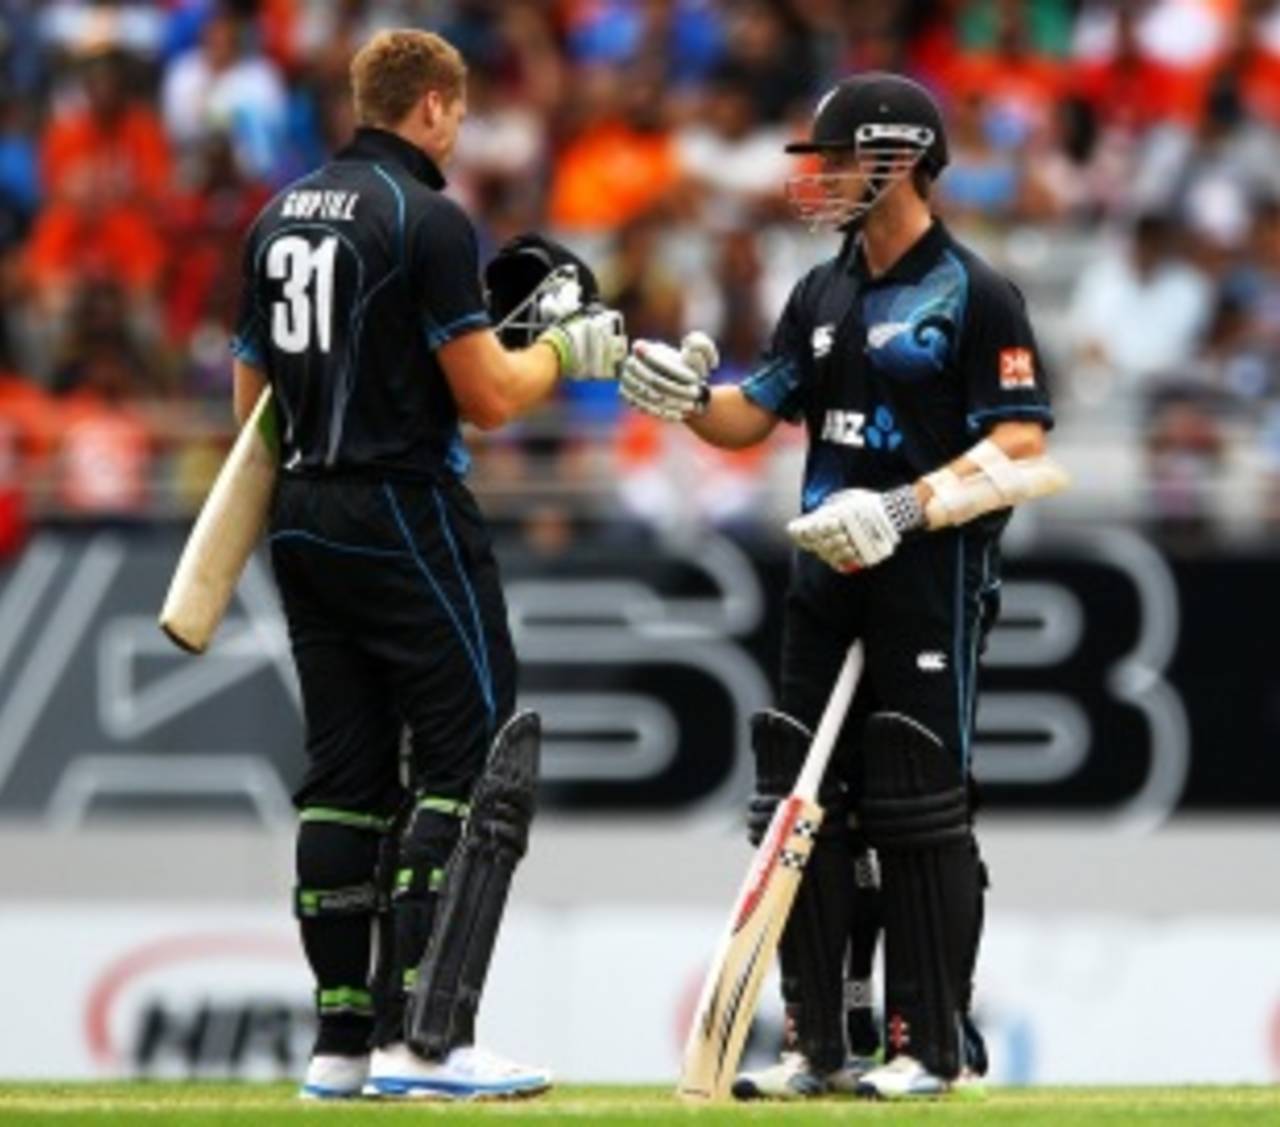 Kane Williamson and Martin Guptill were comically out of sync while trying to sneak a couple&nbsp;&nbsp;&bull;&nbsp;&nbsp;Getty Images